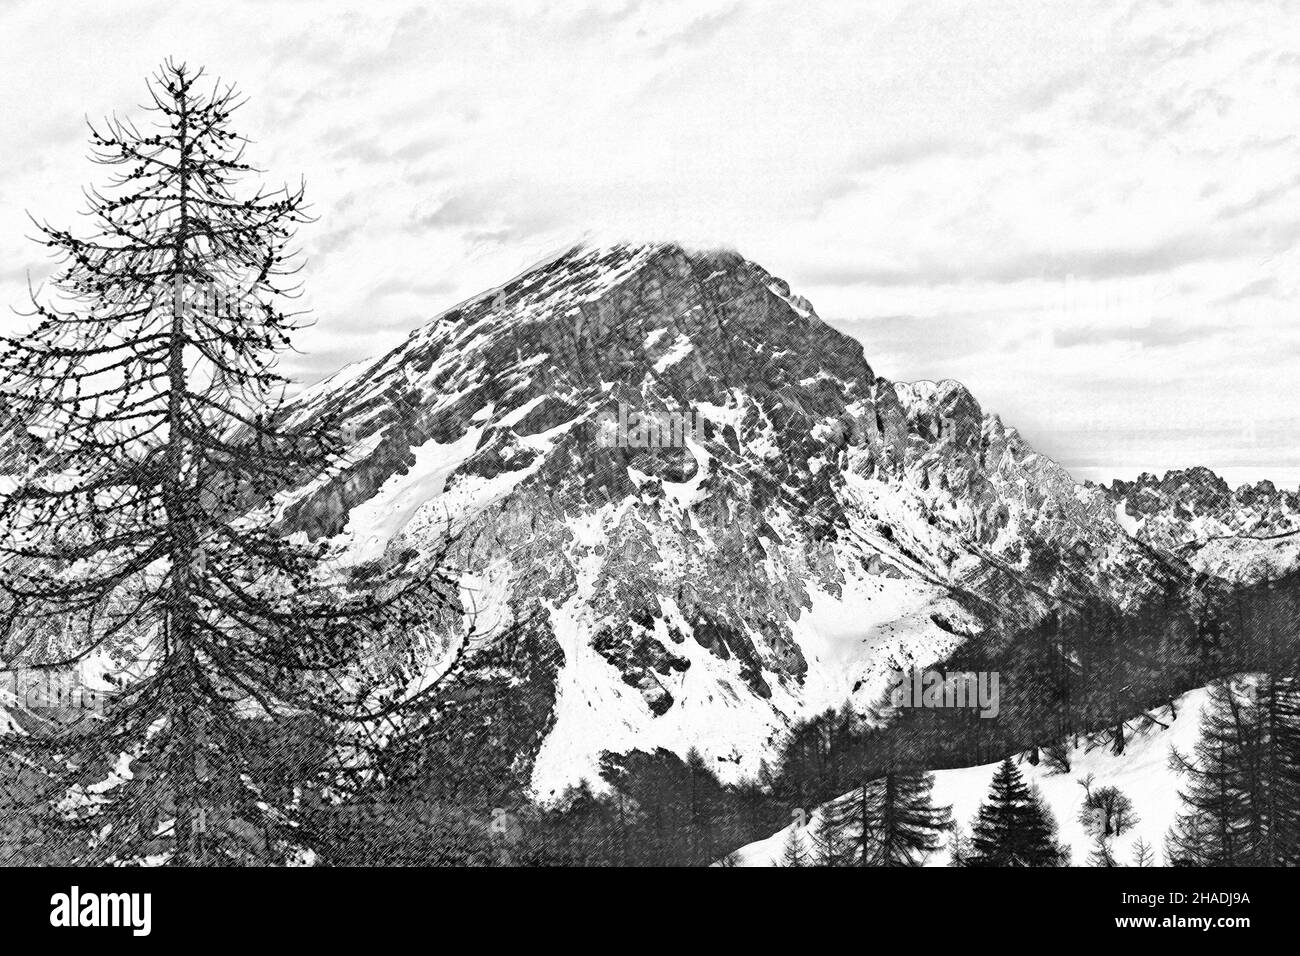 Illustration with charcoal technique of Mount Antelao in winter conditions Stock Photo